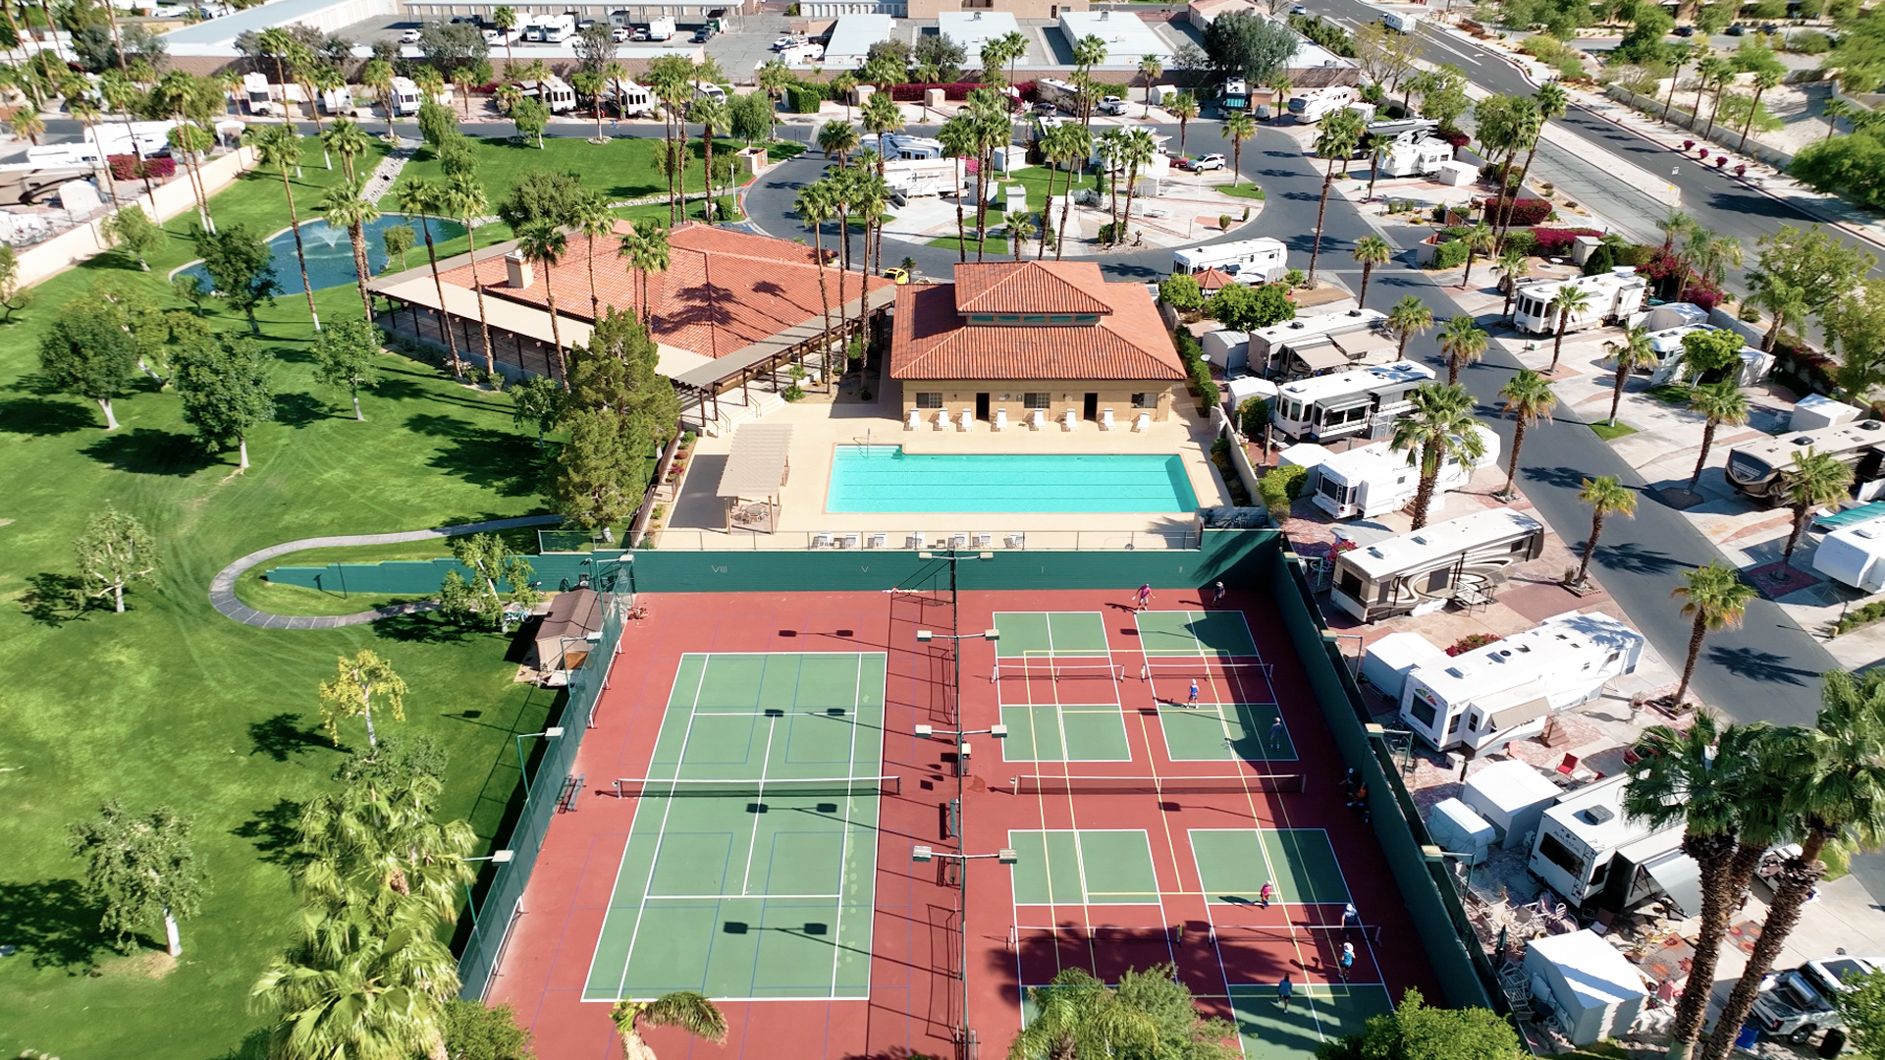 An aerial view of an rv park with a tennis court.